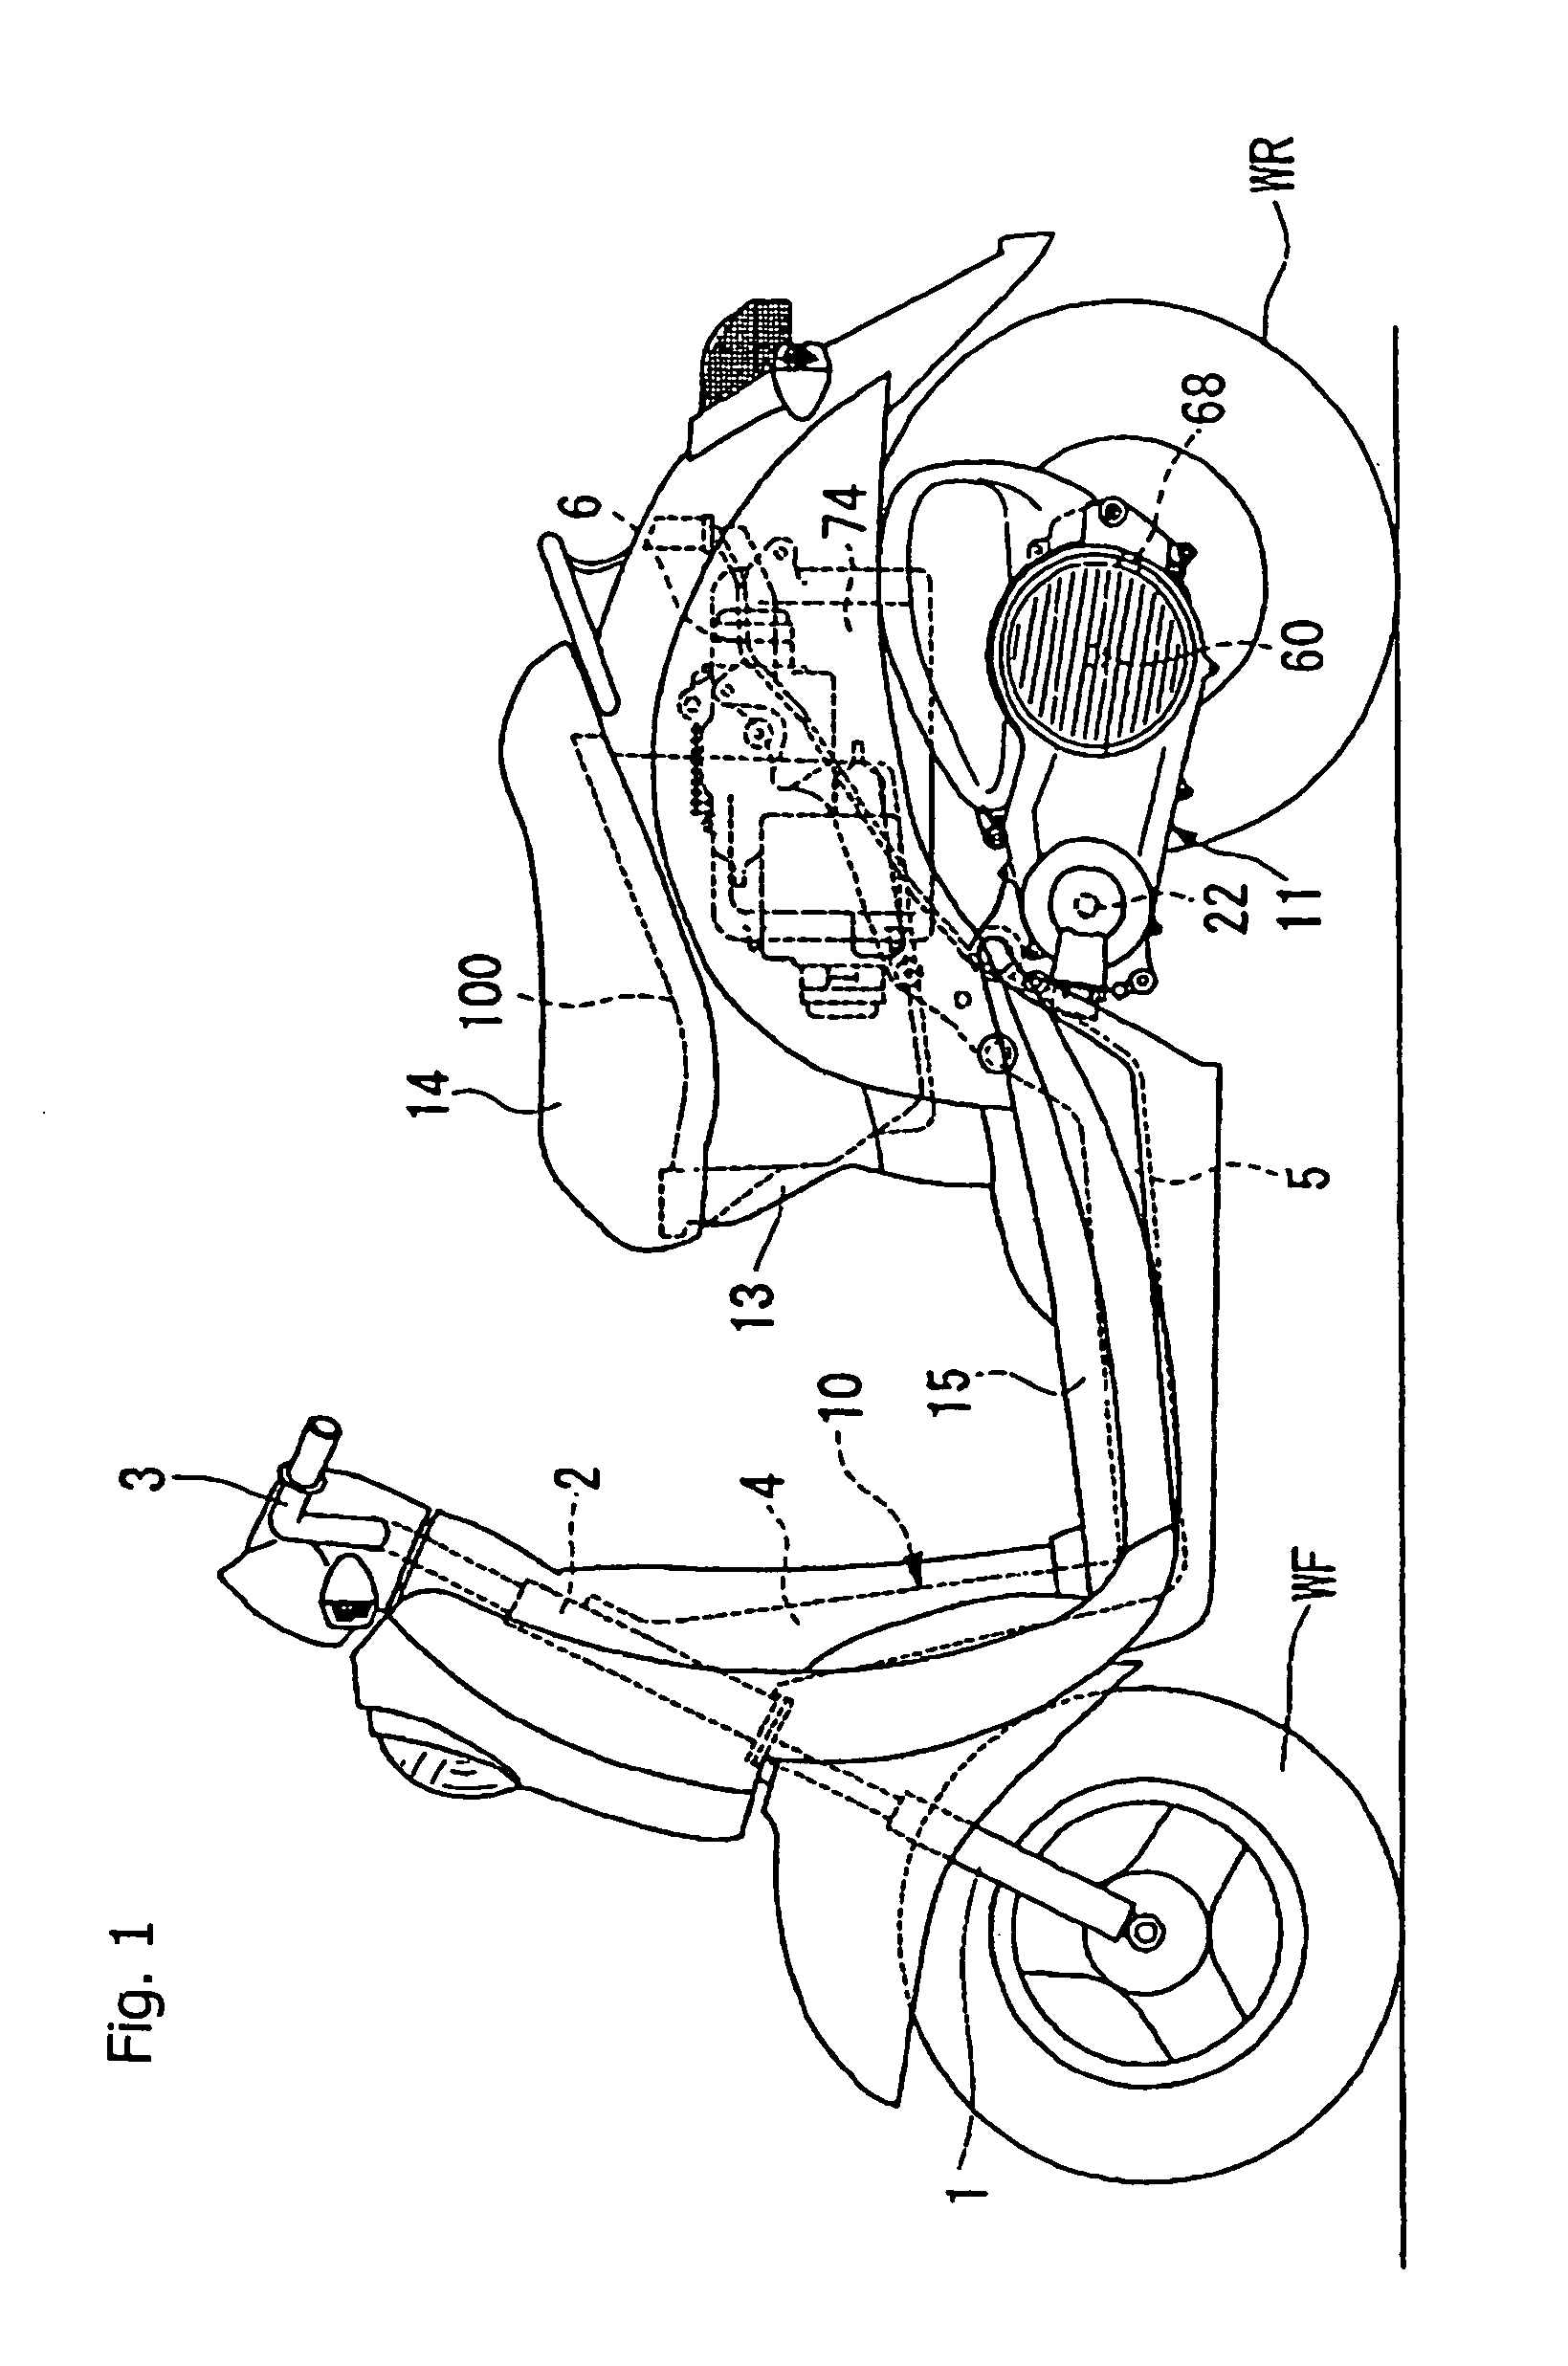 Control method and apparatus for a continuously variable transmission